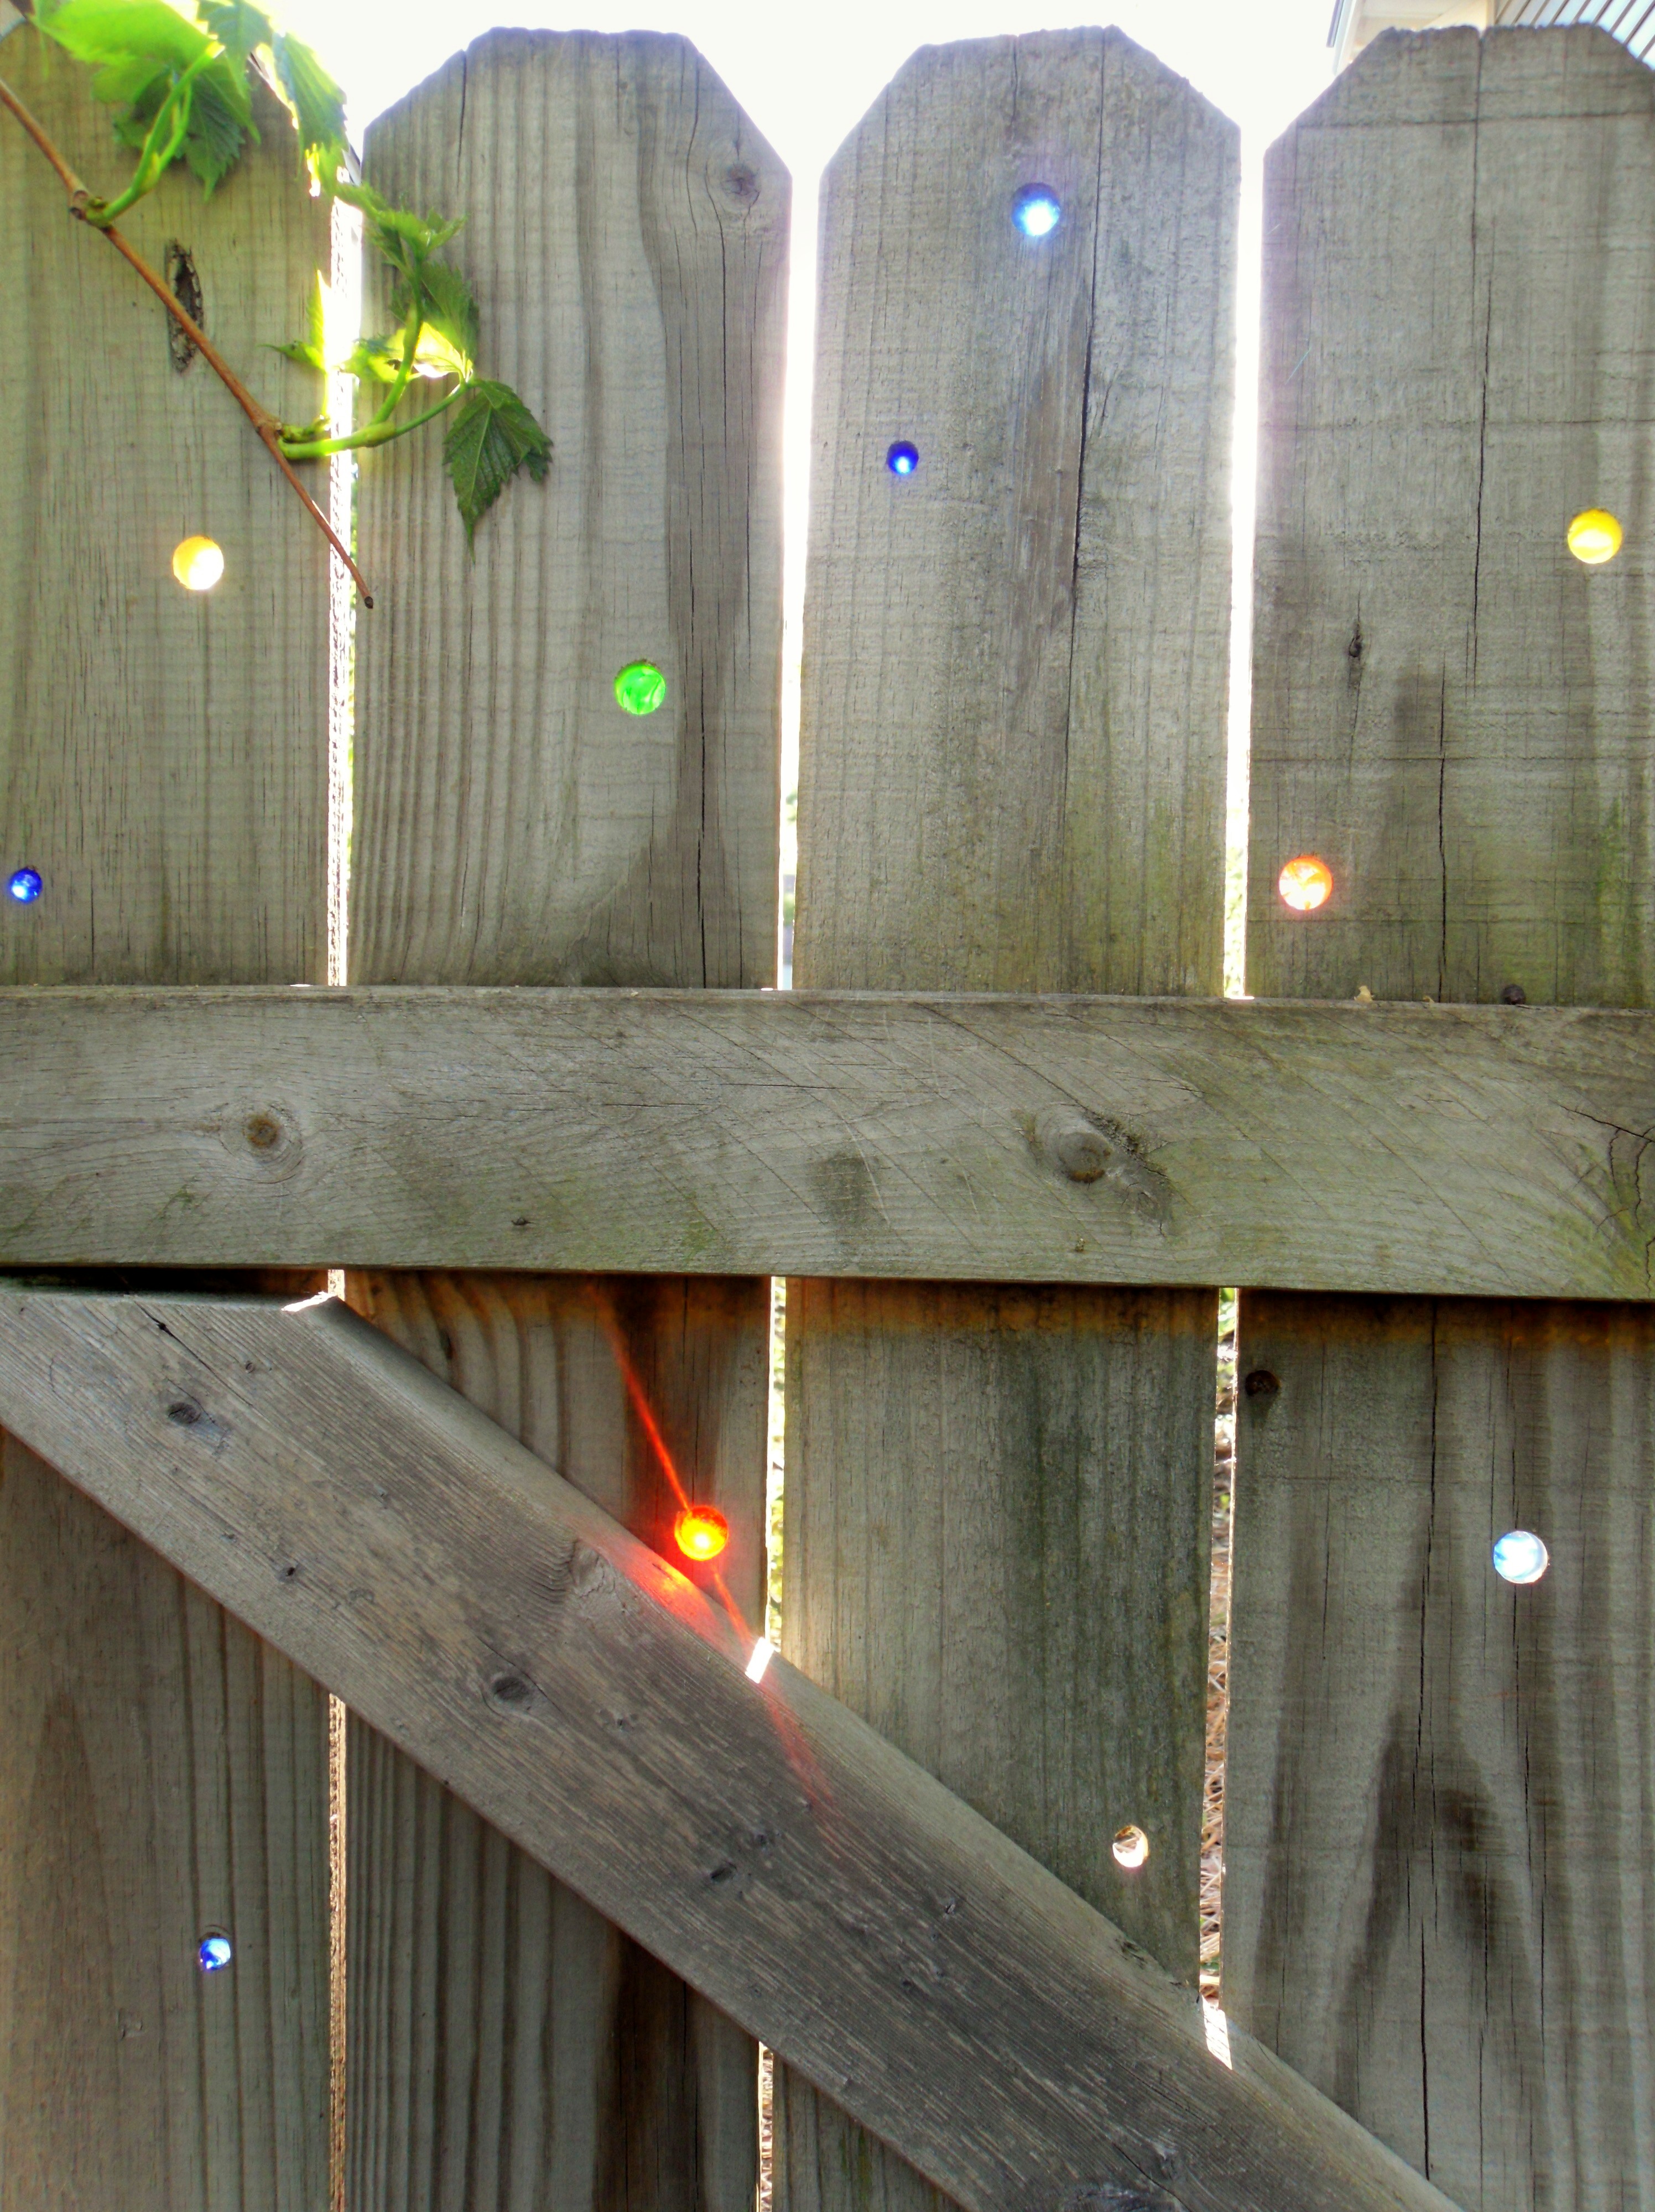 Garden art on the cheap DIY: Glass marbles in your fence